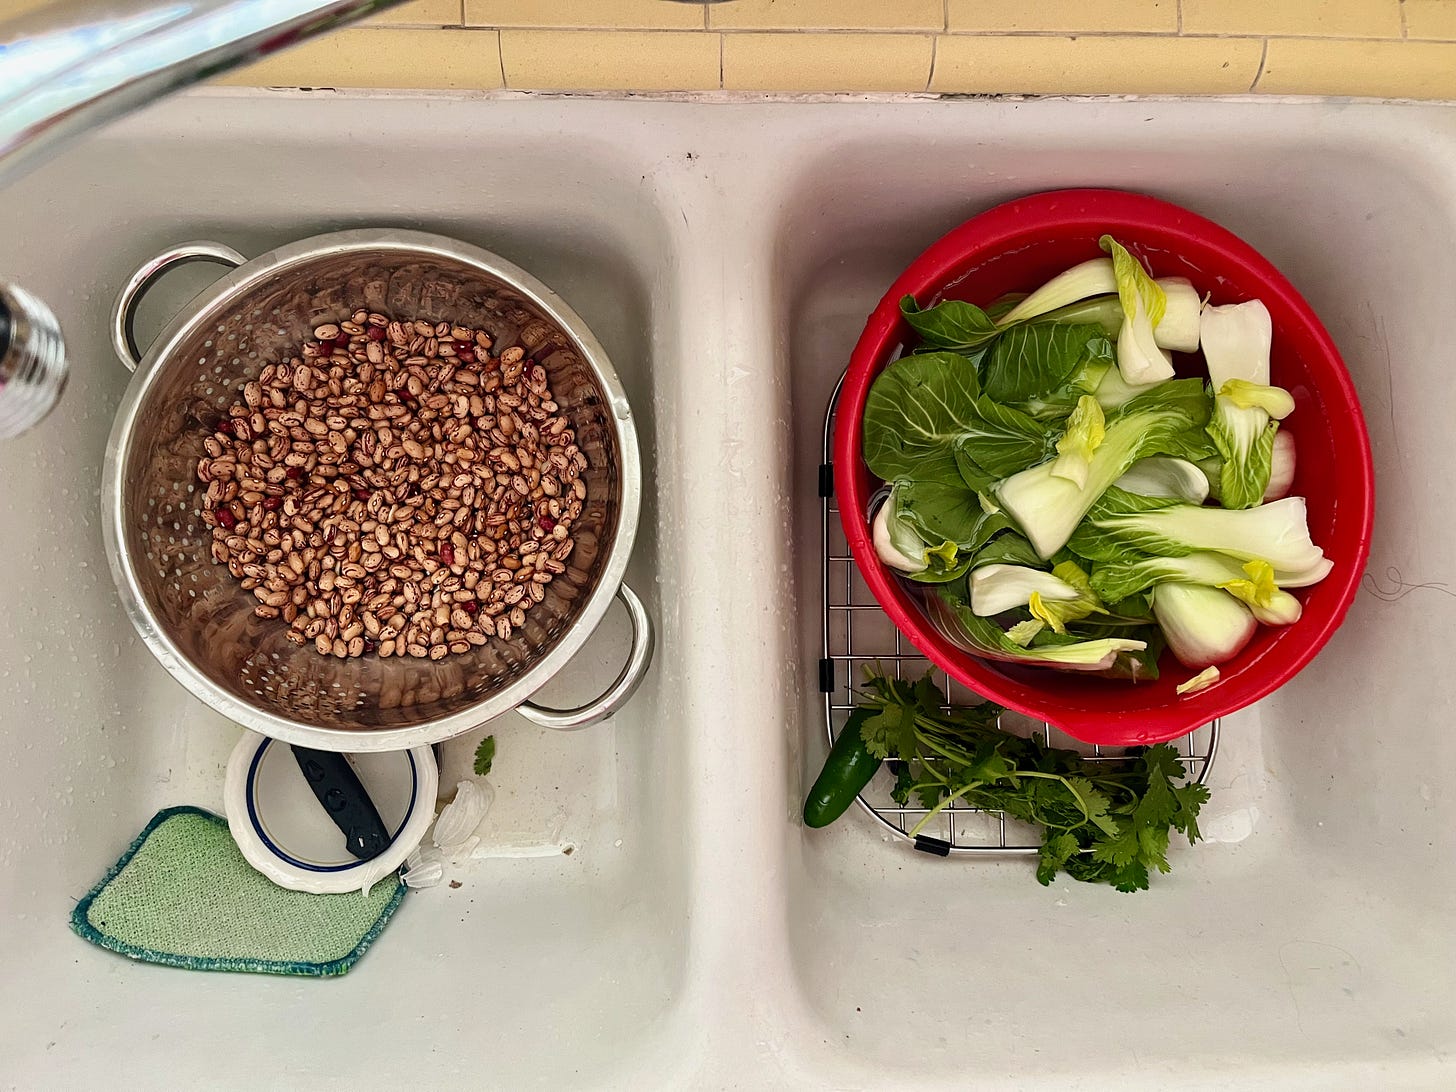 A happy sink filled with beans and vegetables